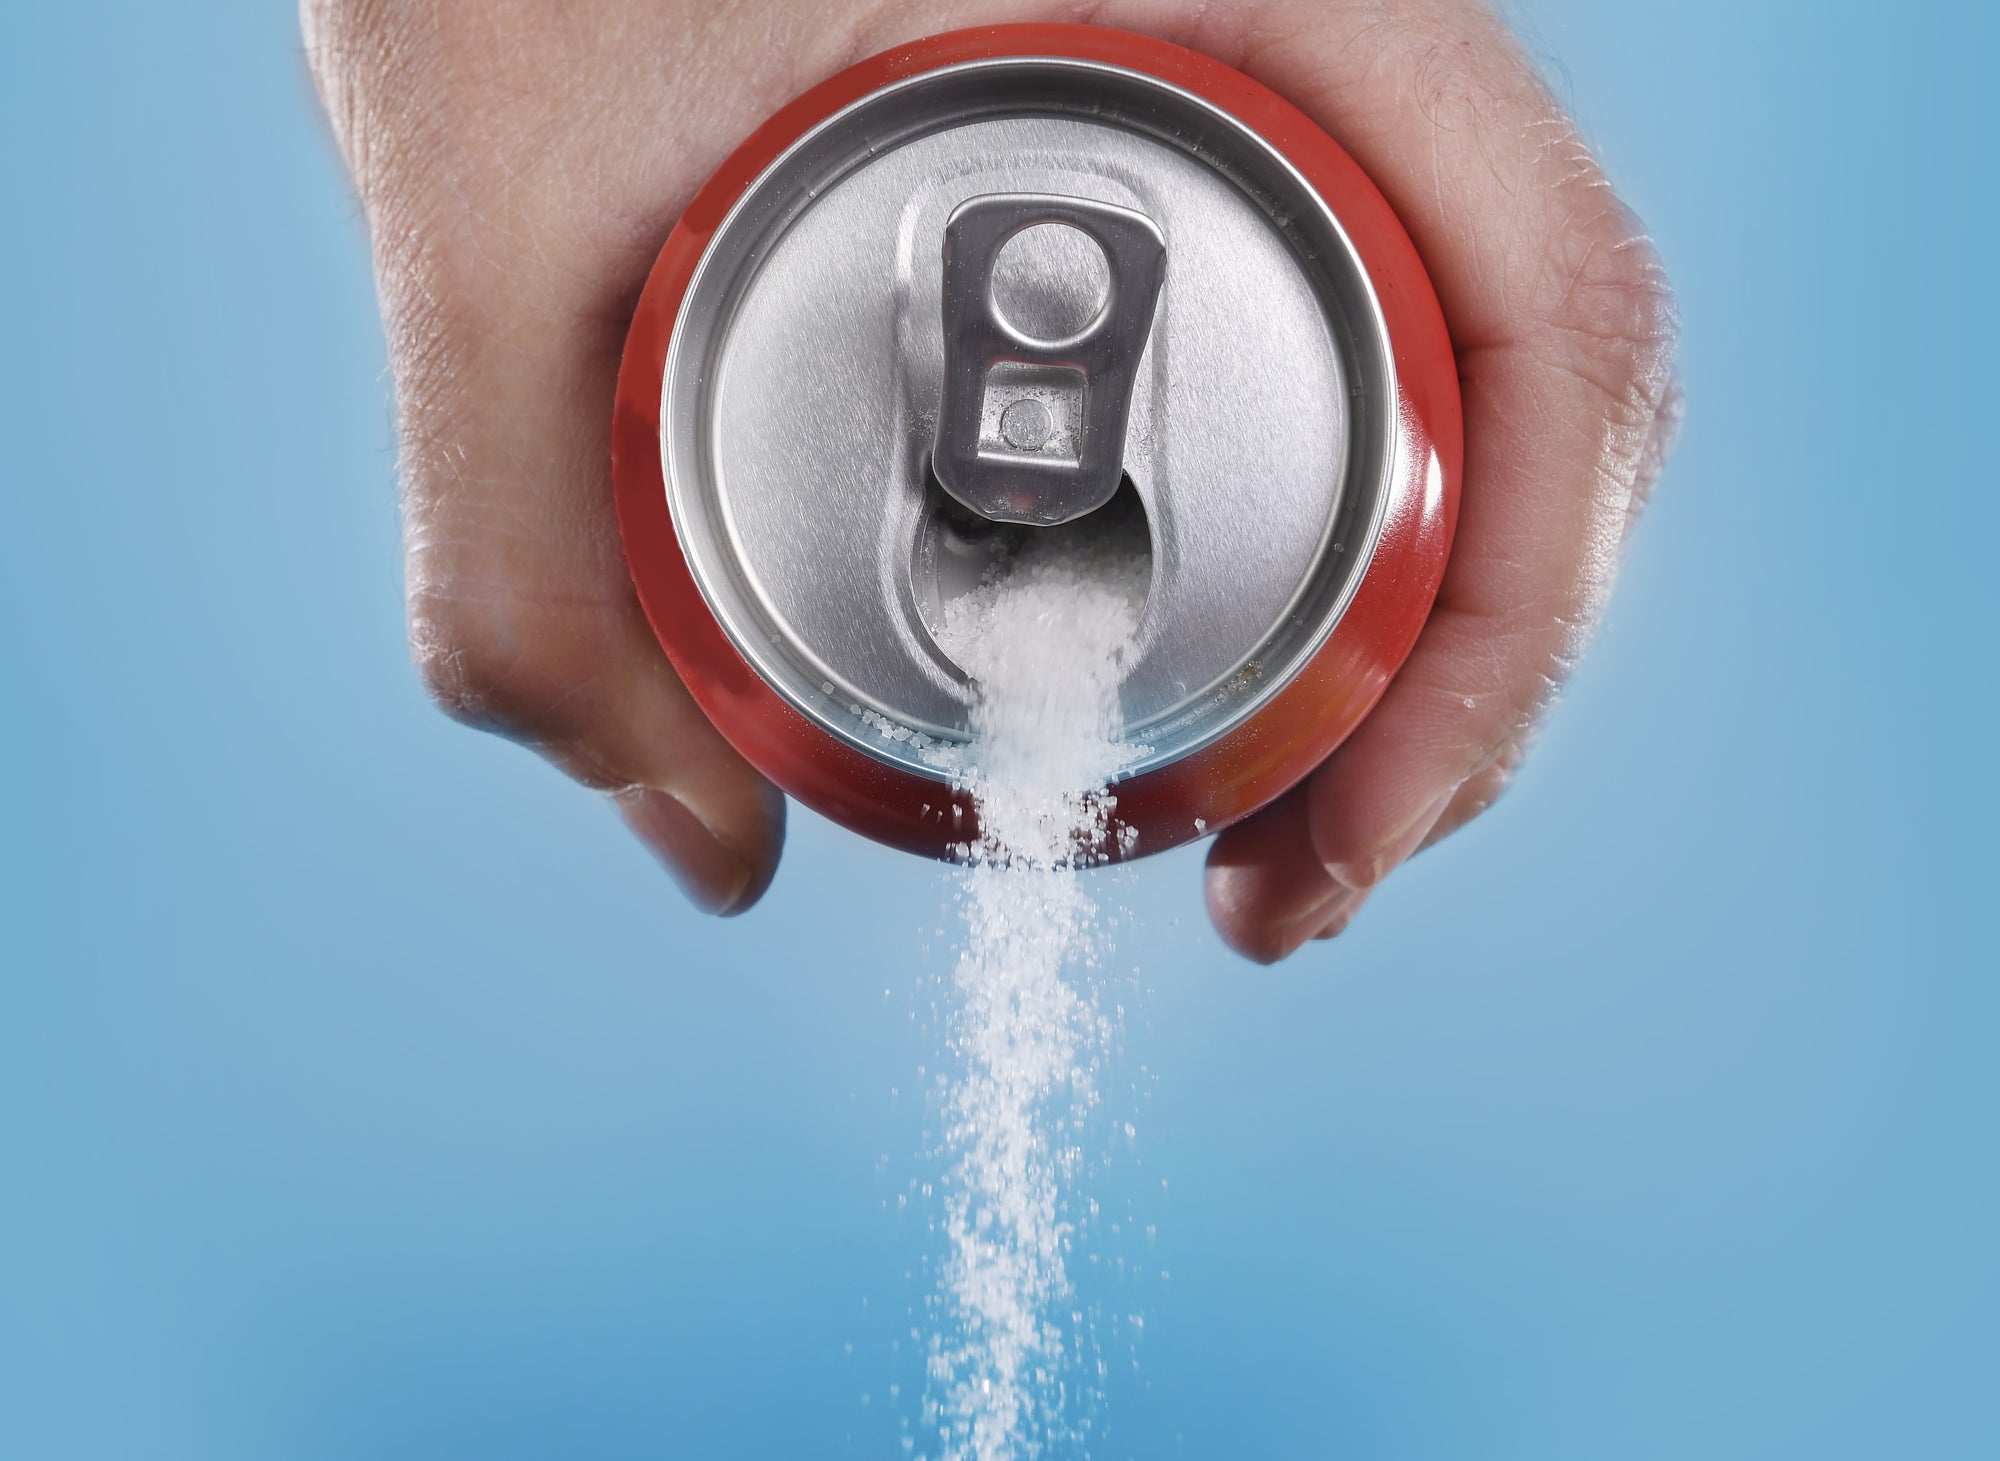 Increased risk of AFib linked to drinking artificially sweetened beverages